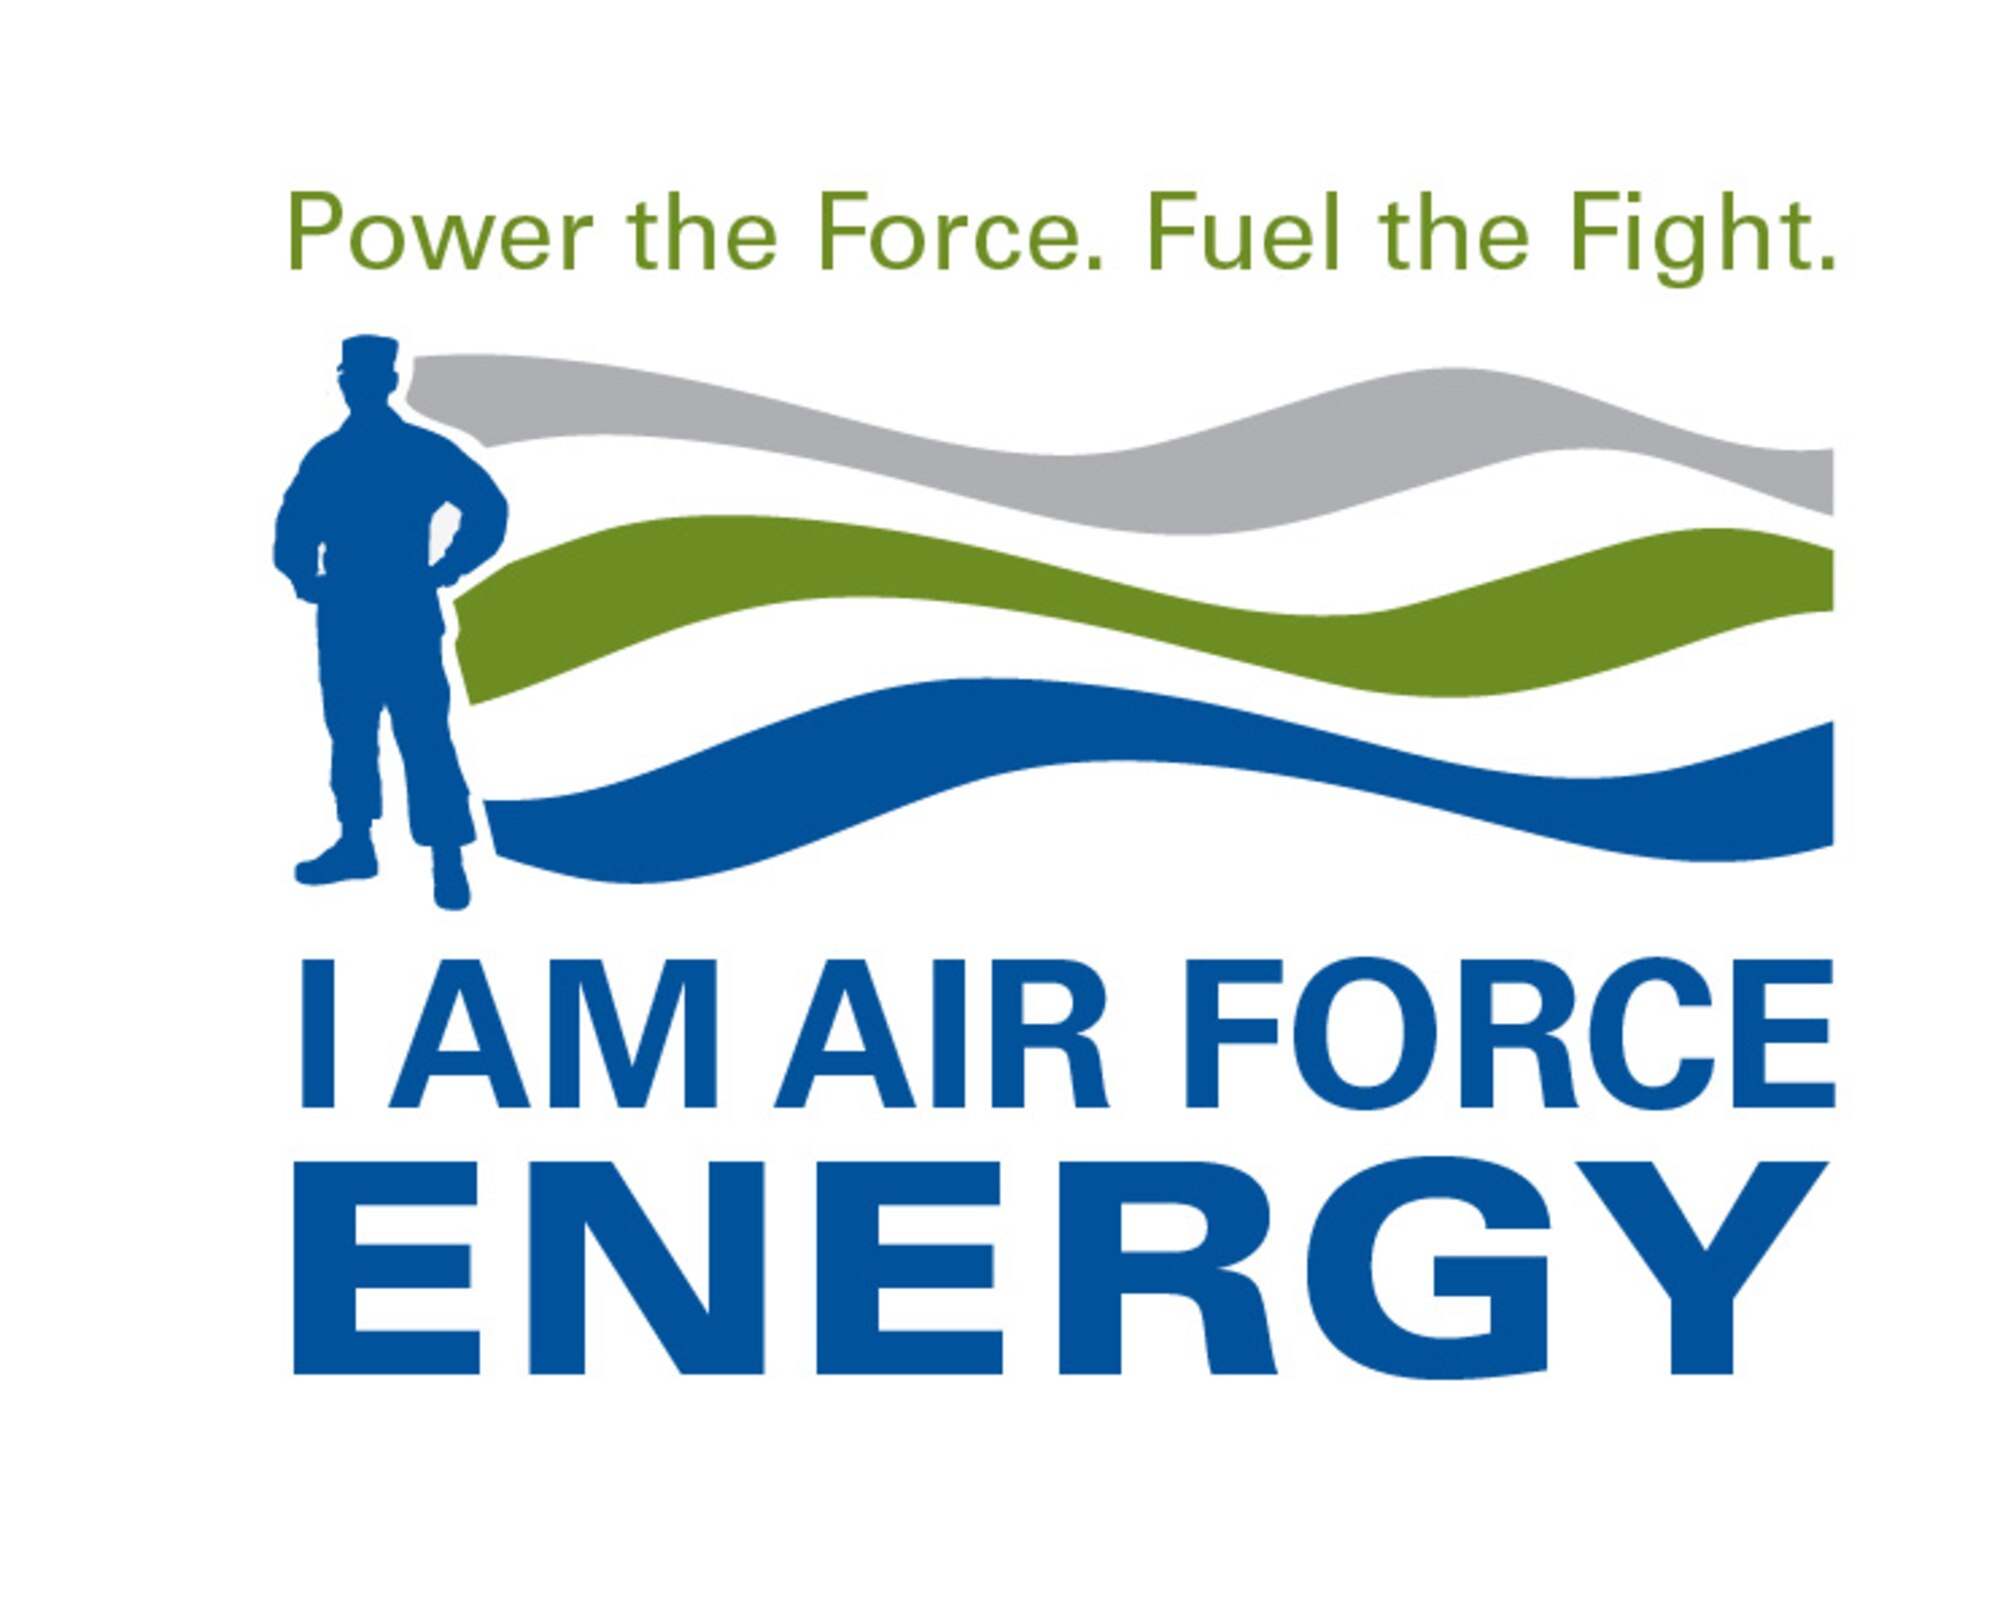 Conserving energy is good for the Air Force Reserve